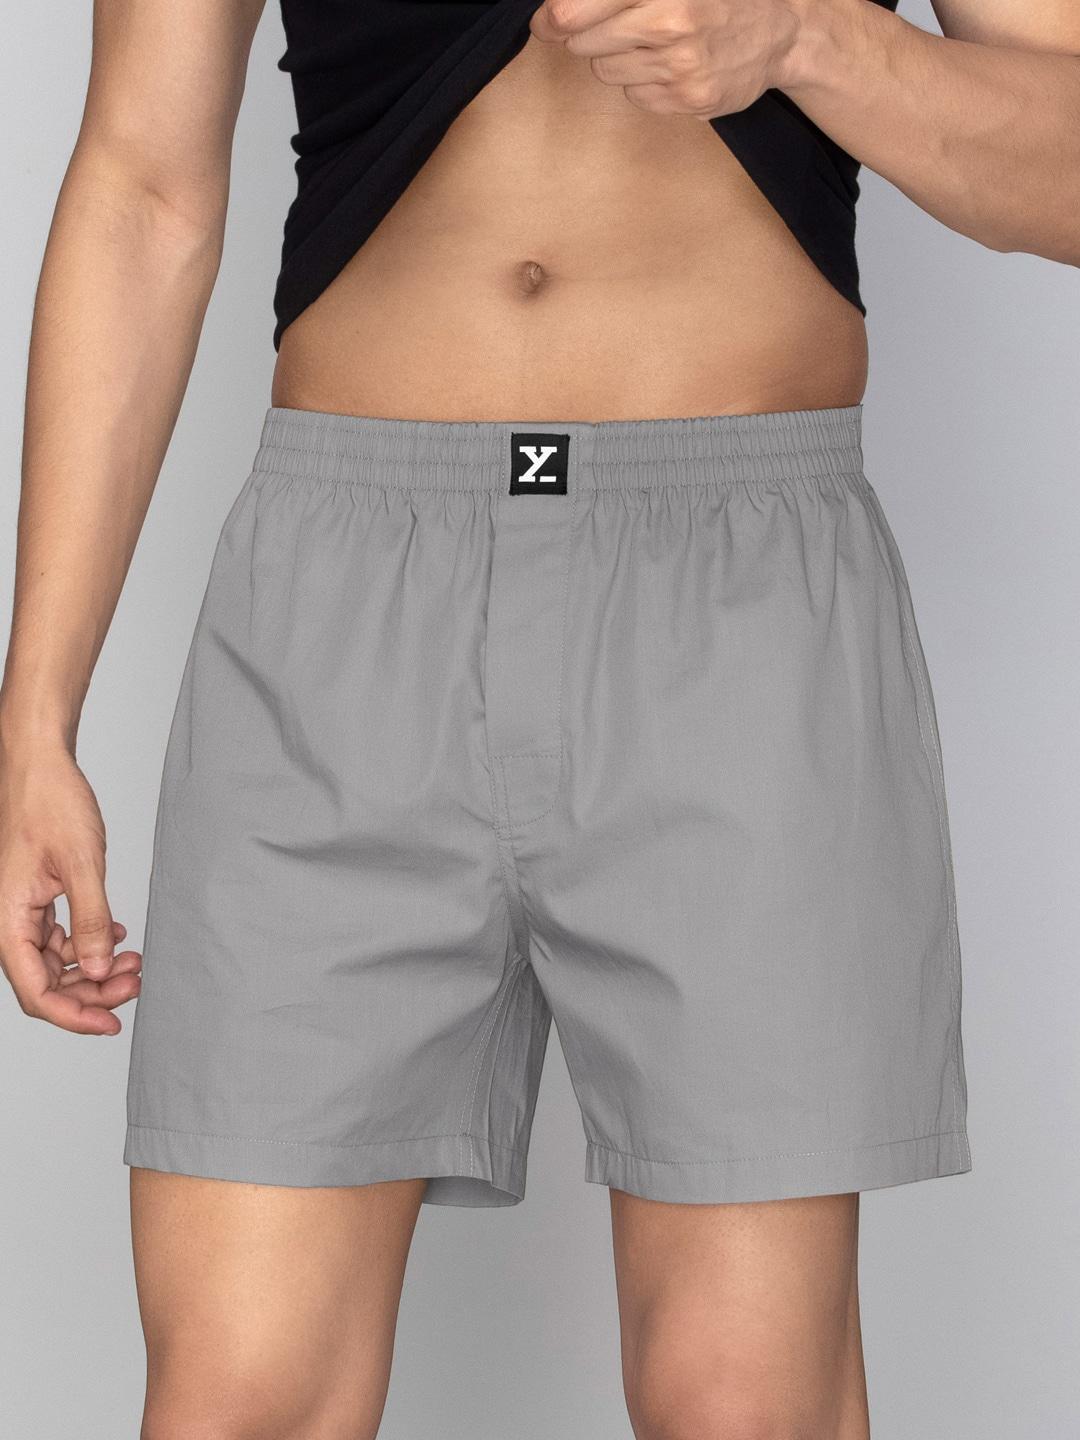 xyxx-men-pack-of-1-pace-intellifresh-super-combed-cotton-boxers